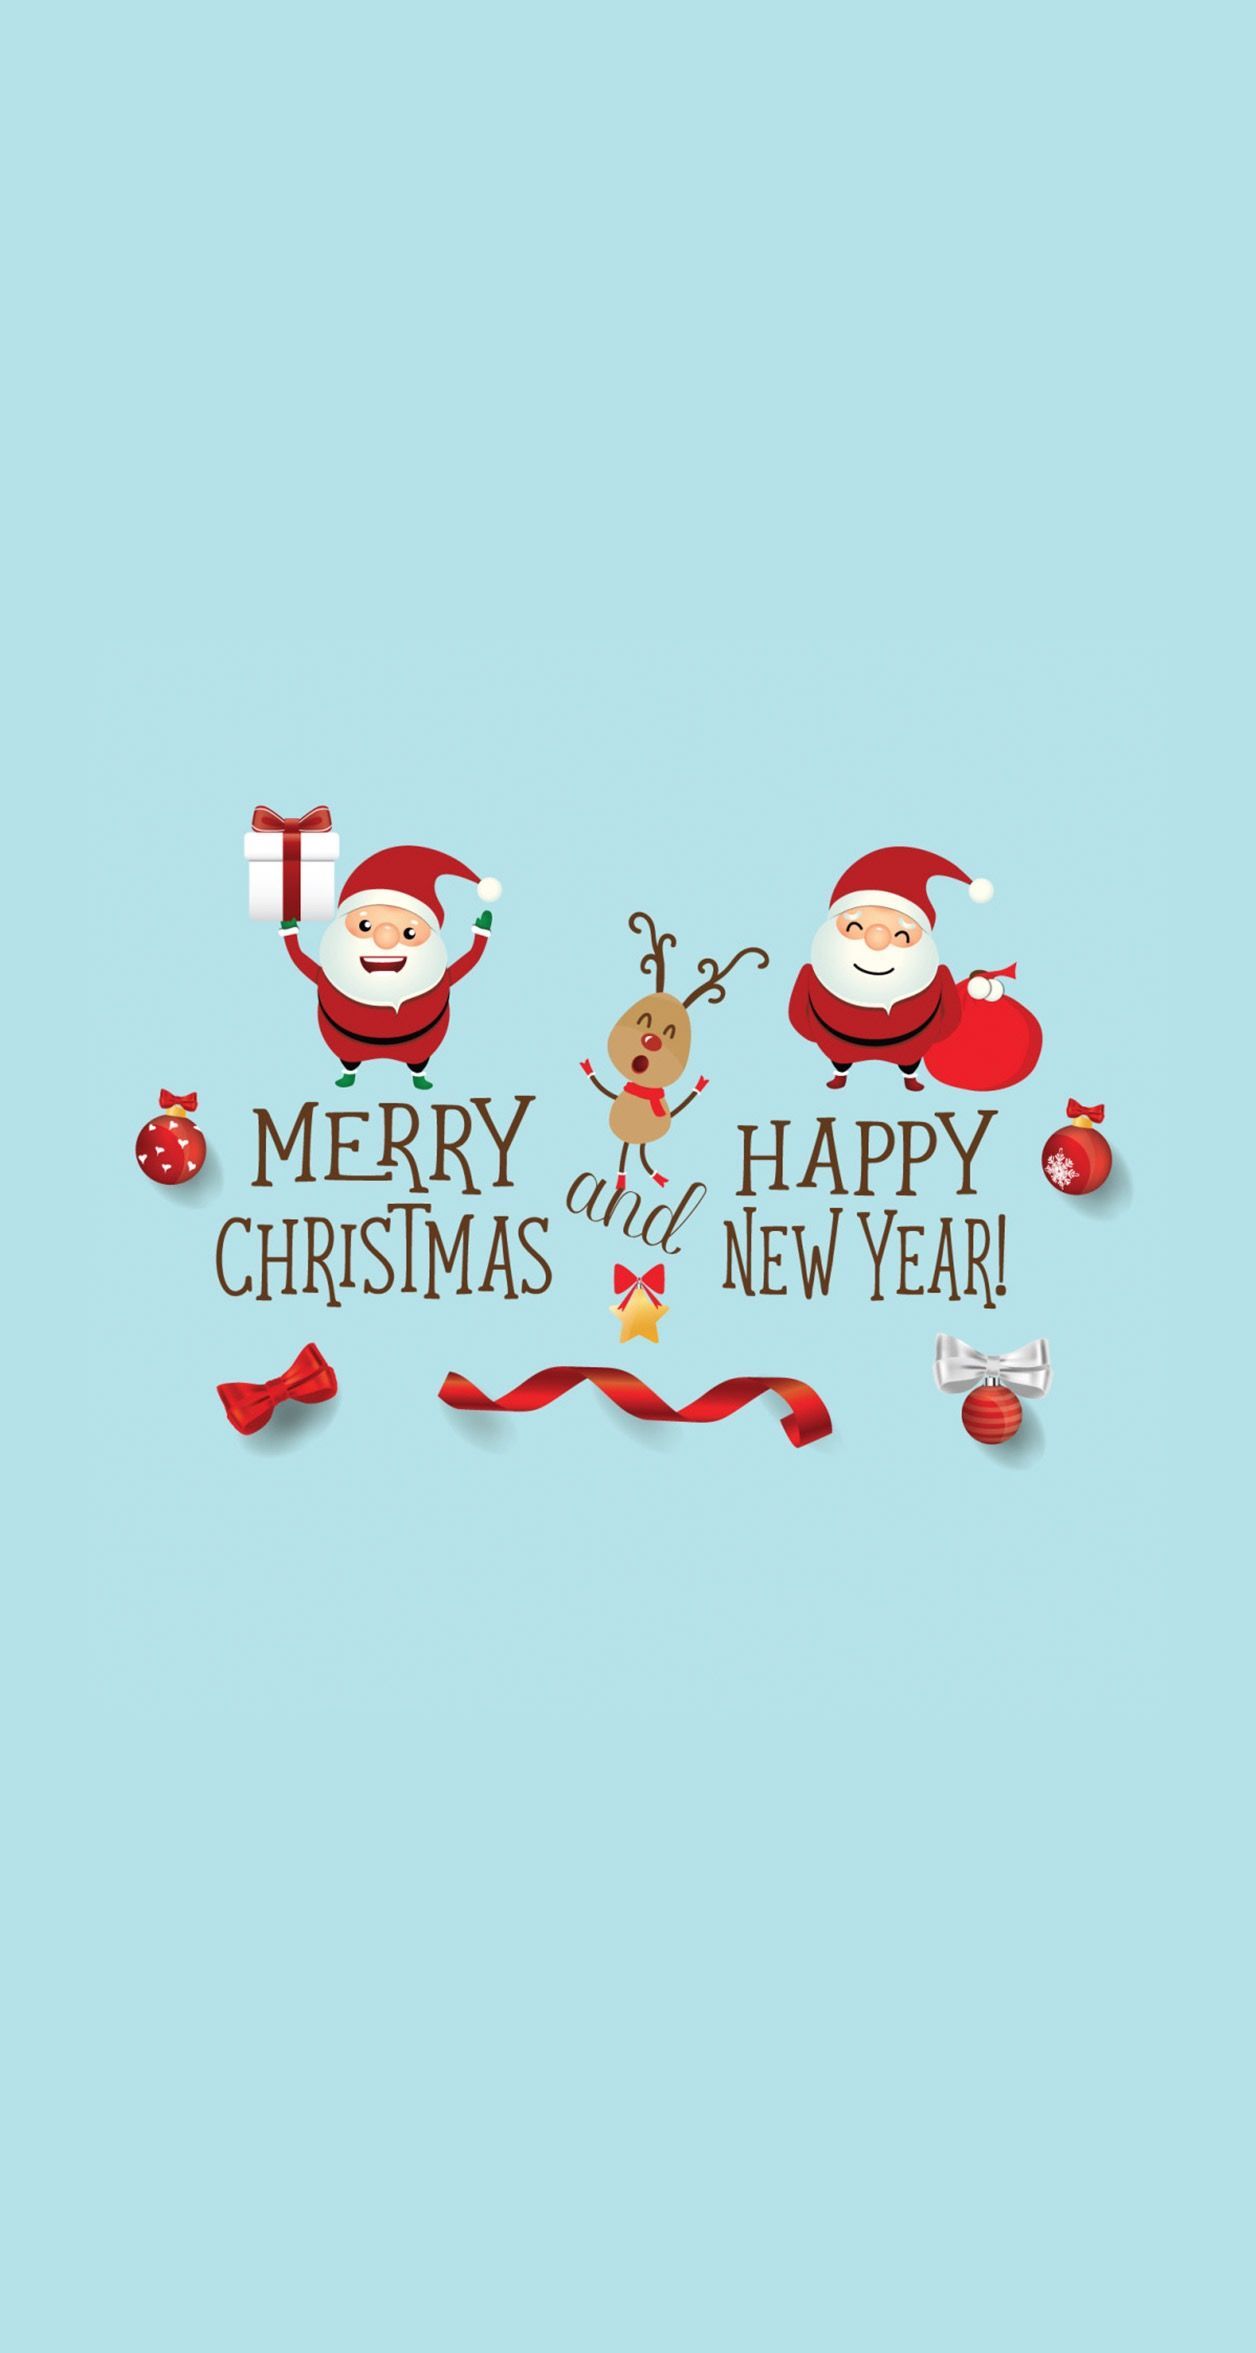 Merry Christmas and Happy New Year!. Wallpaper iphone christmas, Merry christmas wallpaper, Christmas illustration